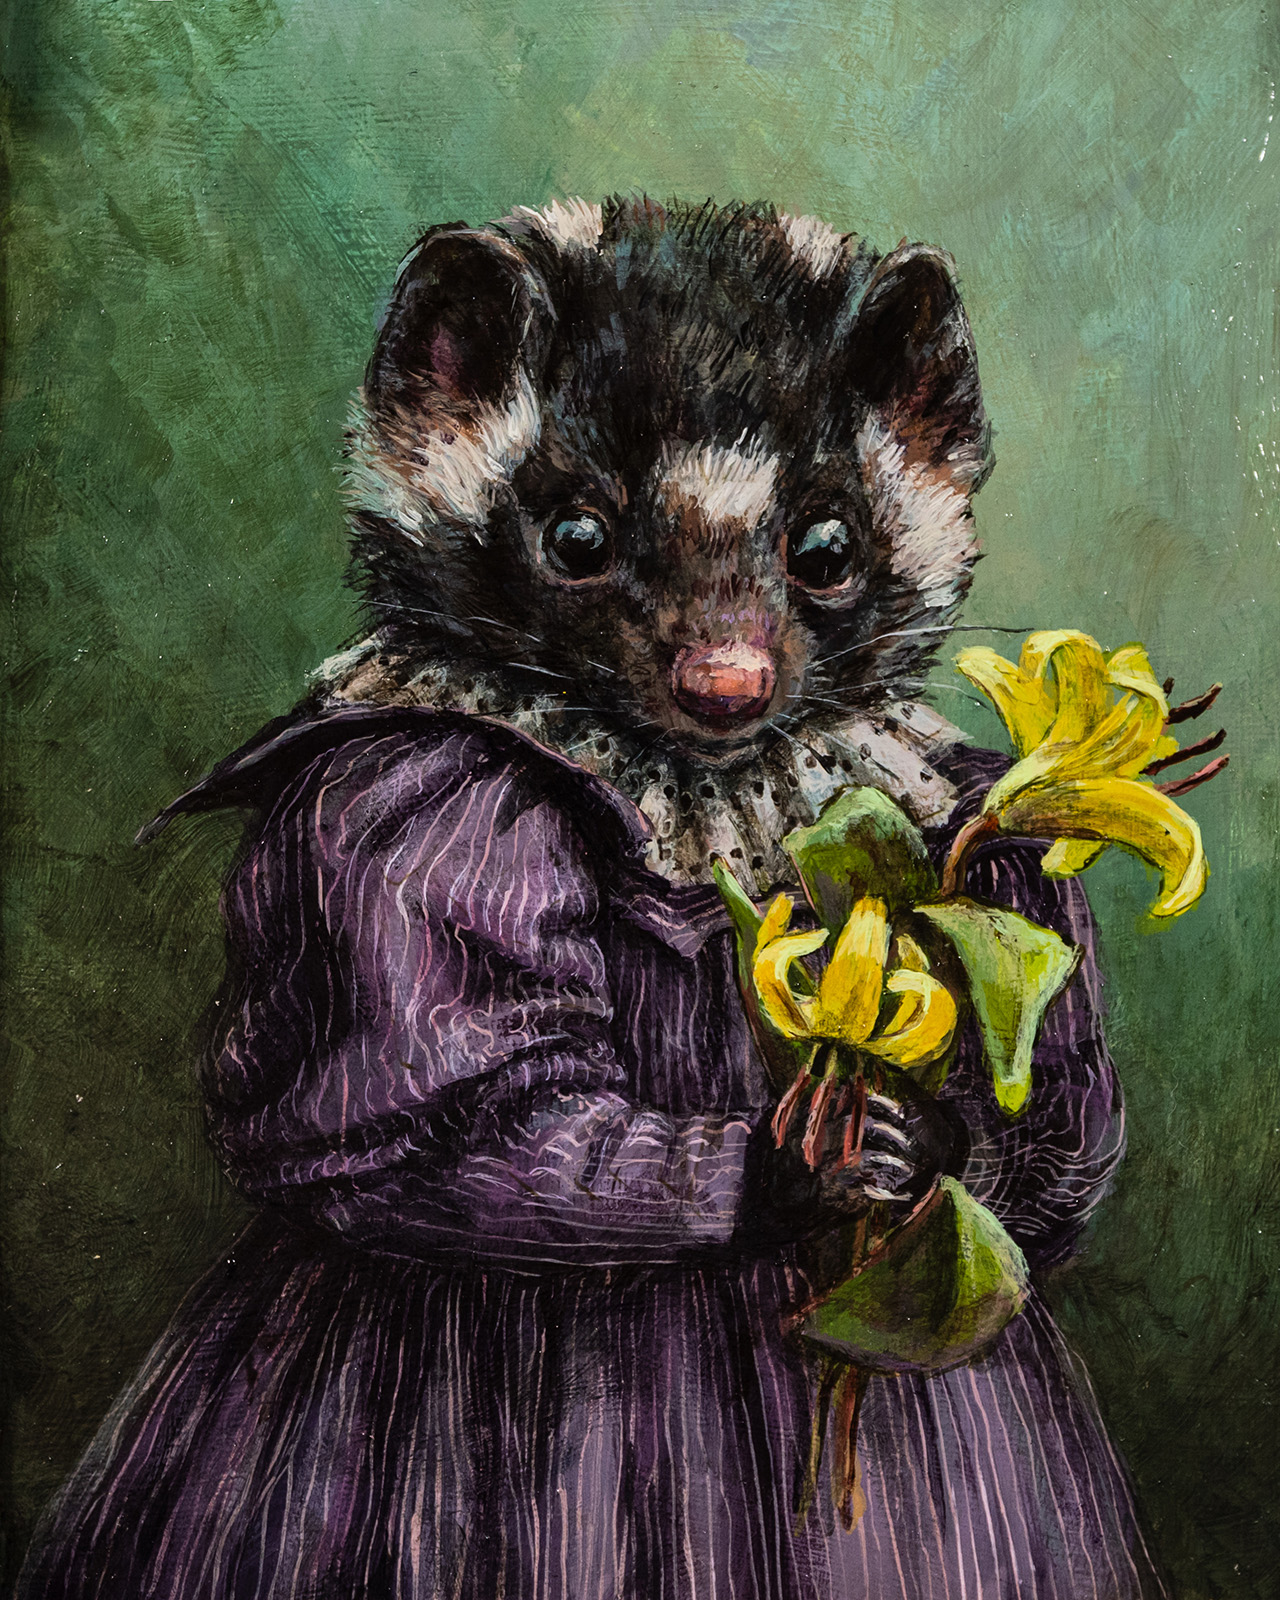 A painting of a spotted skunk in a purple dress, holding a bunch of yellow flowers.